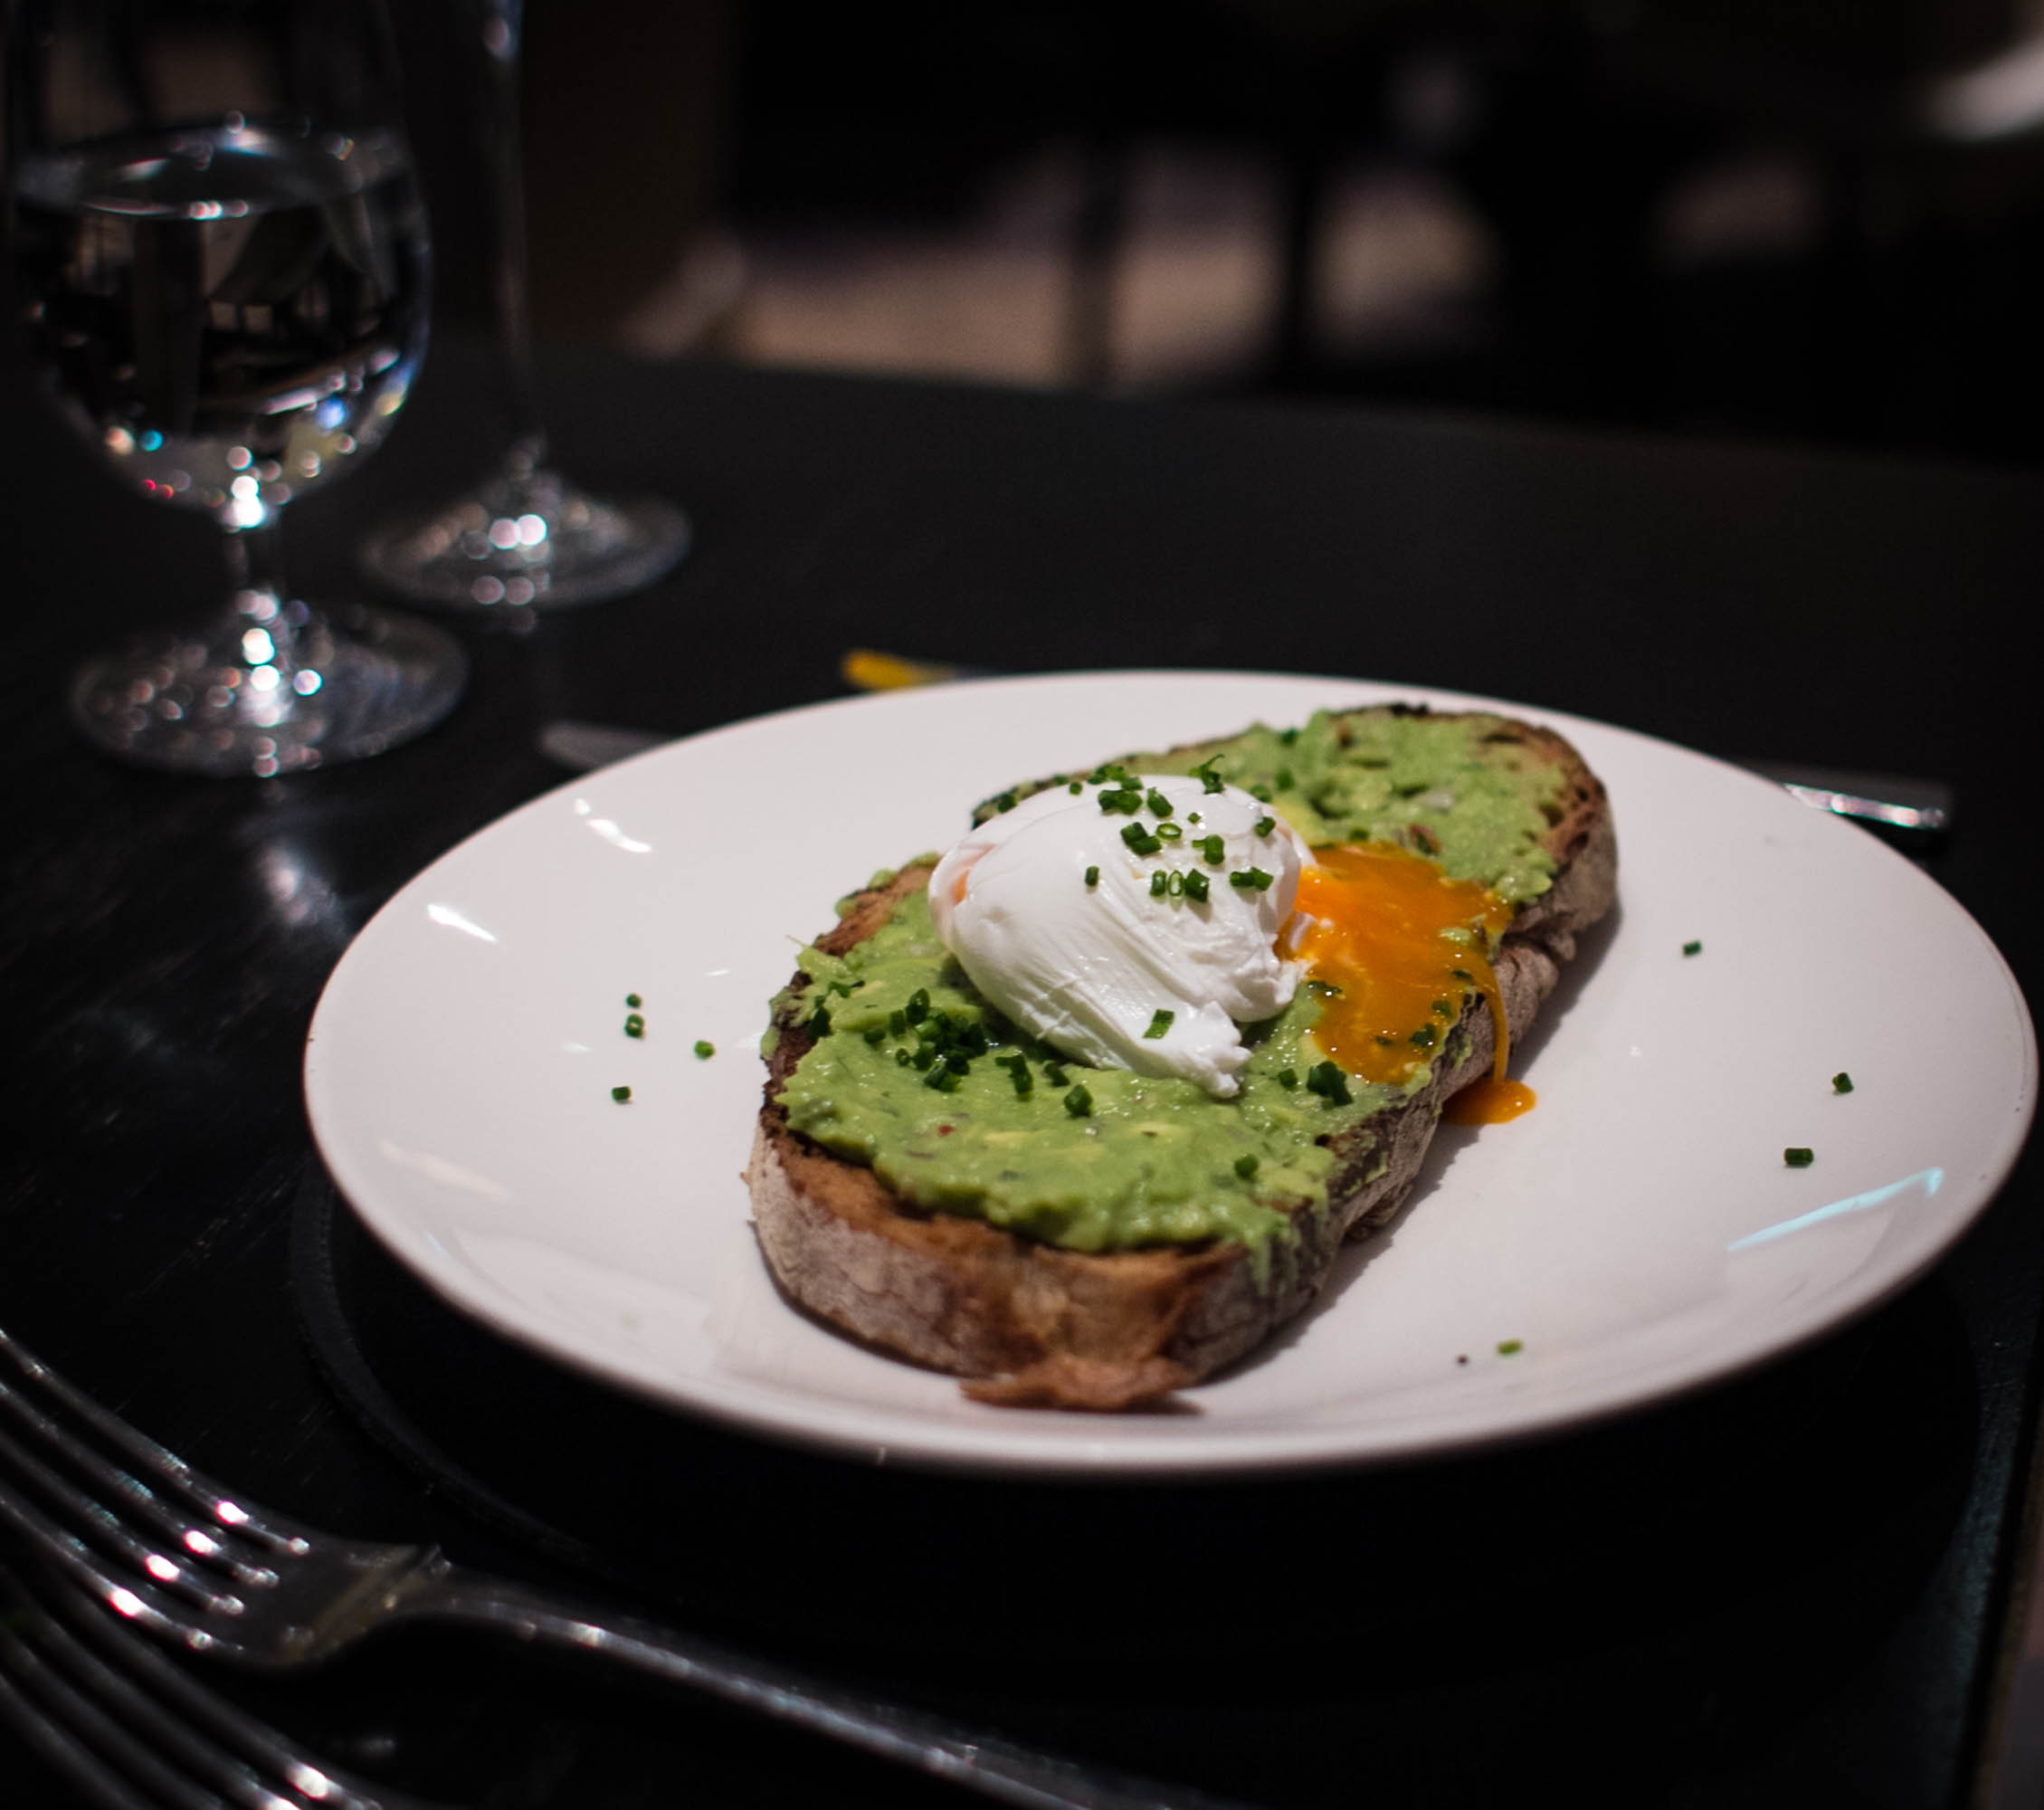 sourdough toast with mash avocado and poached egg